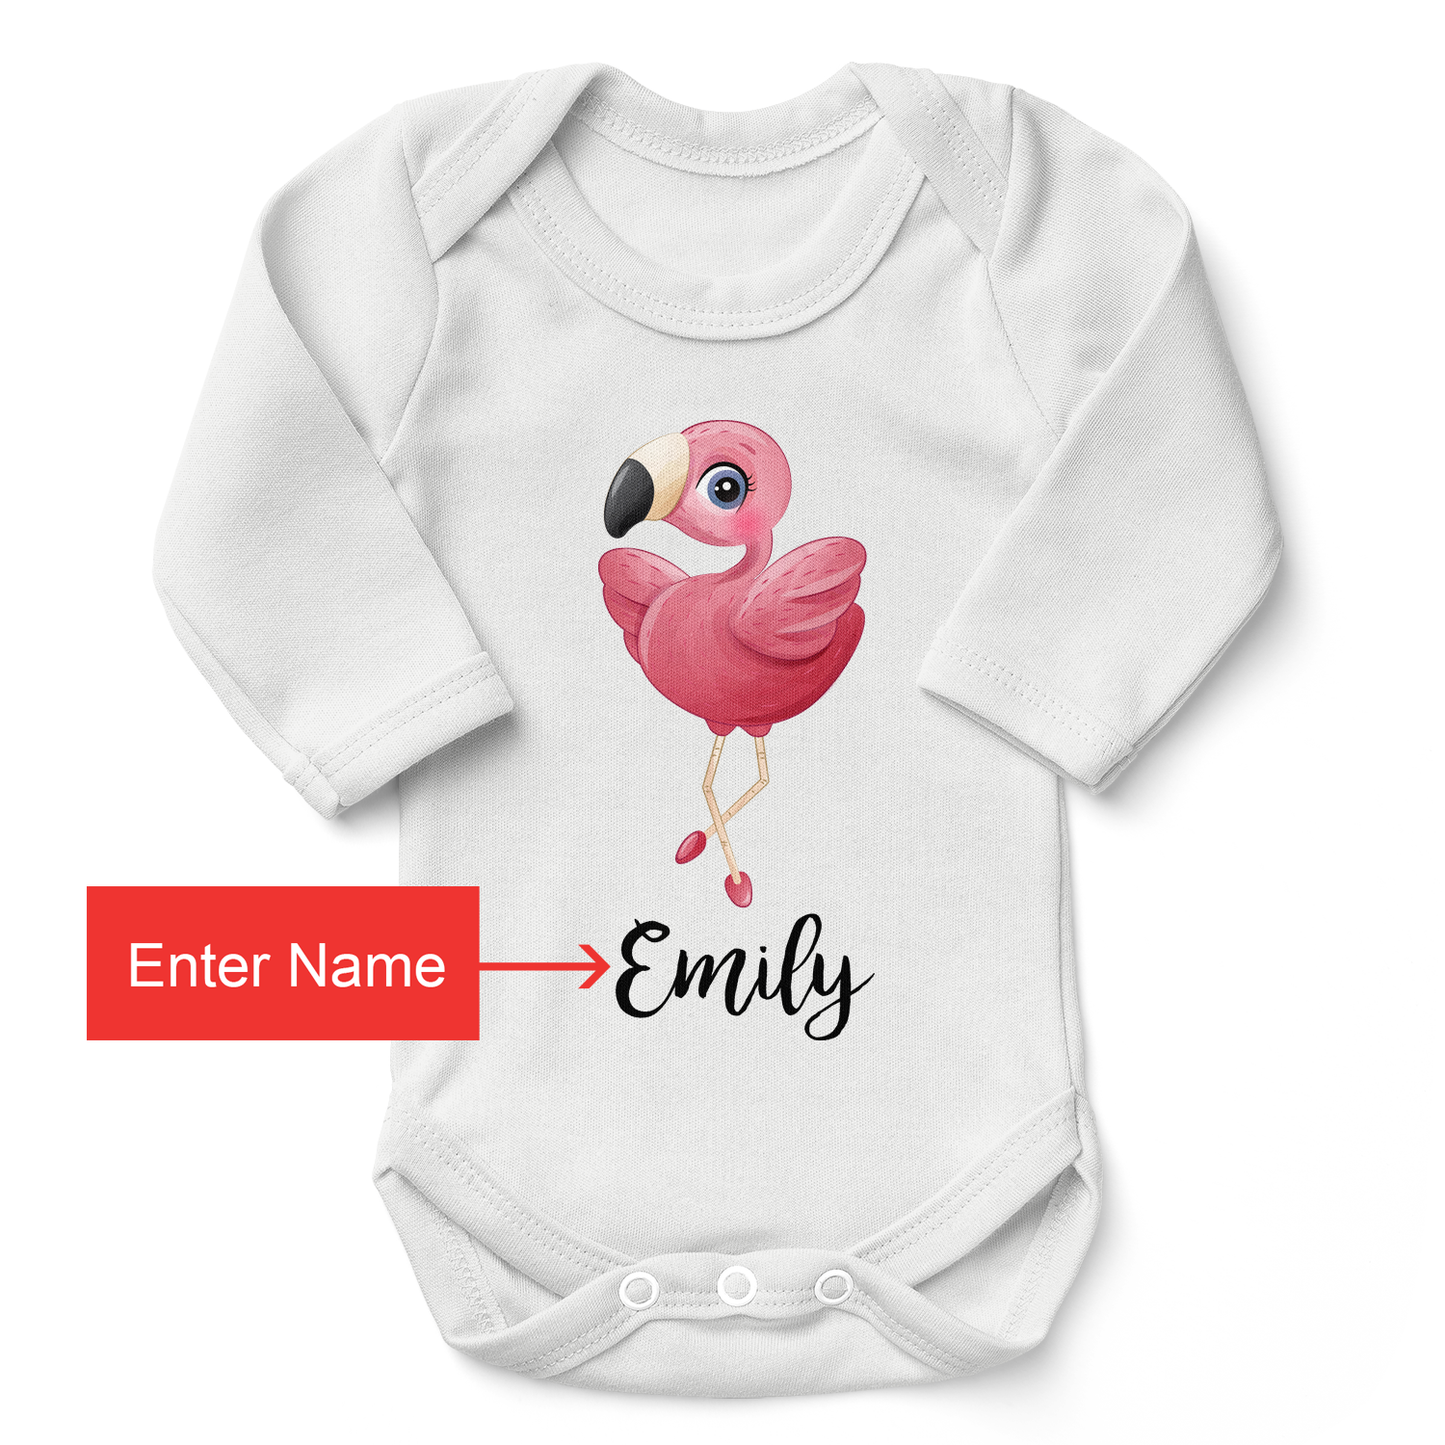 Personalized Matching Mom & Baby Organic Outfits - Flamingo Family (White)